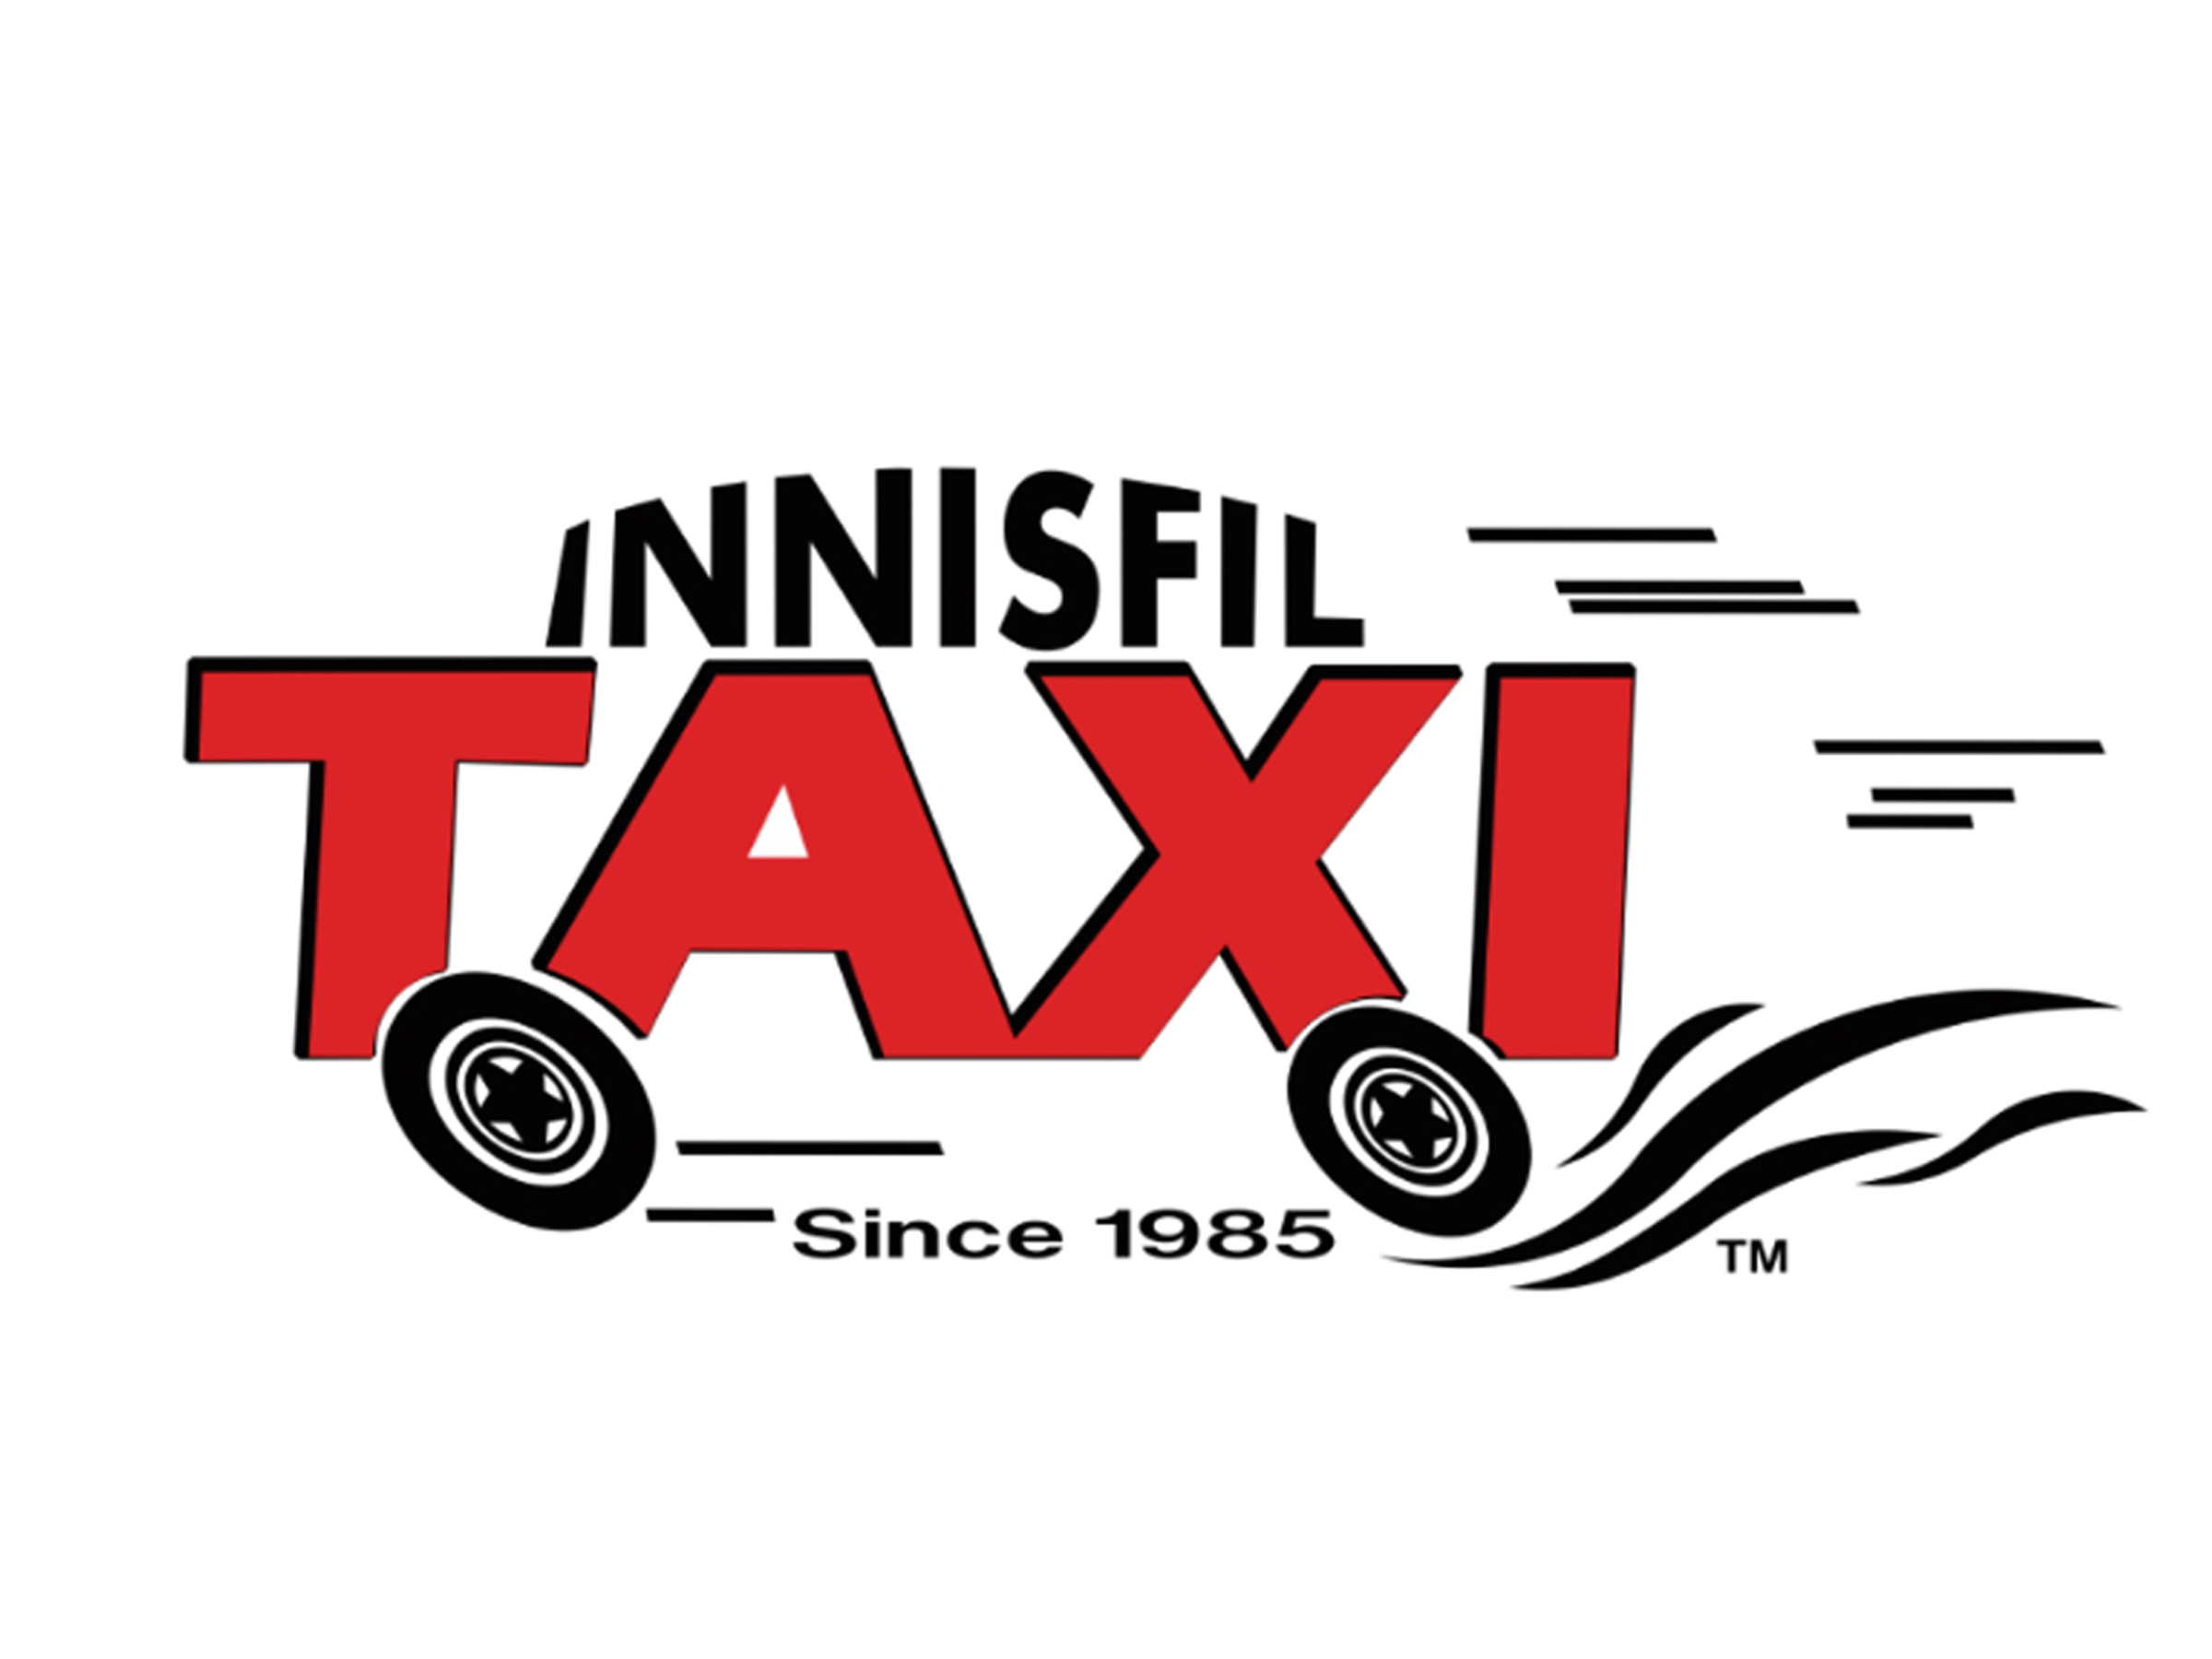 Welcome to Innisfil Taxi